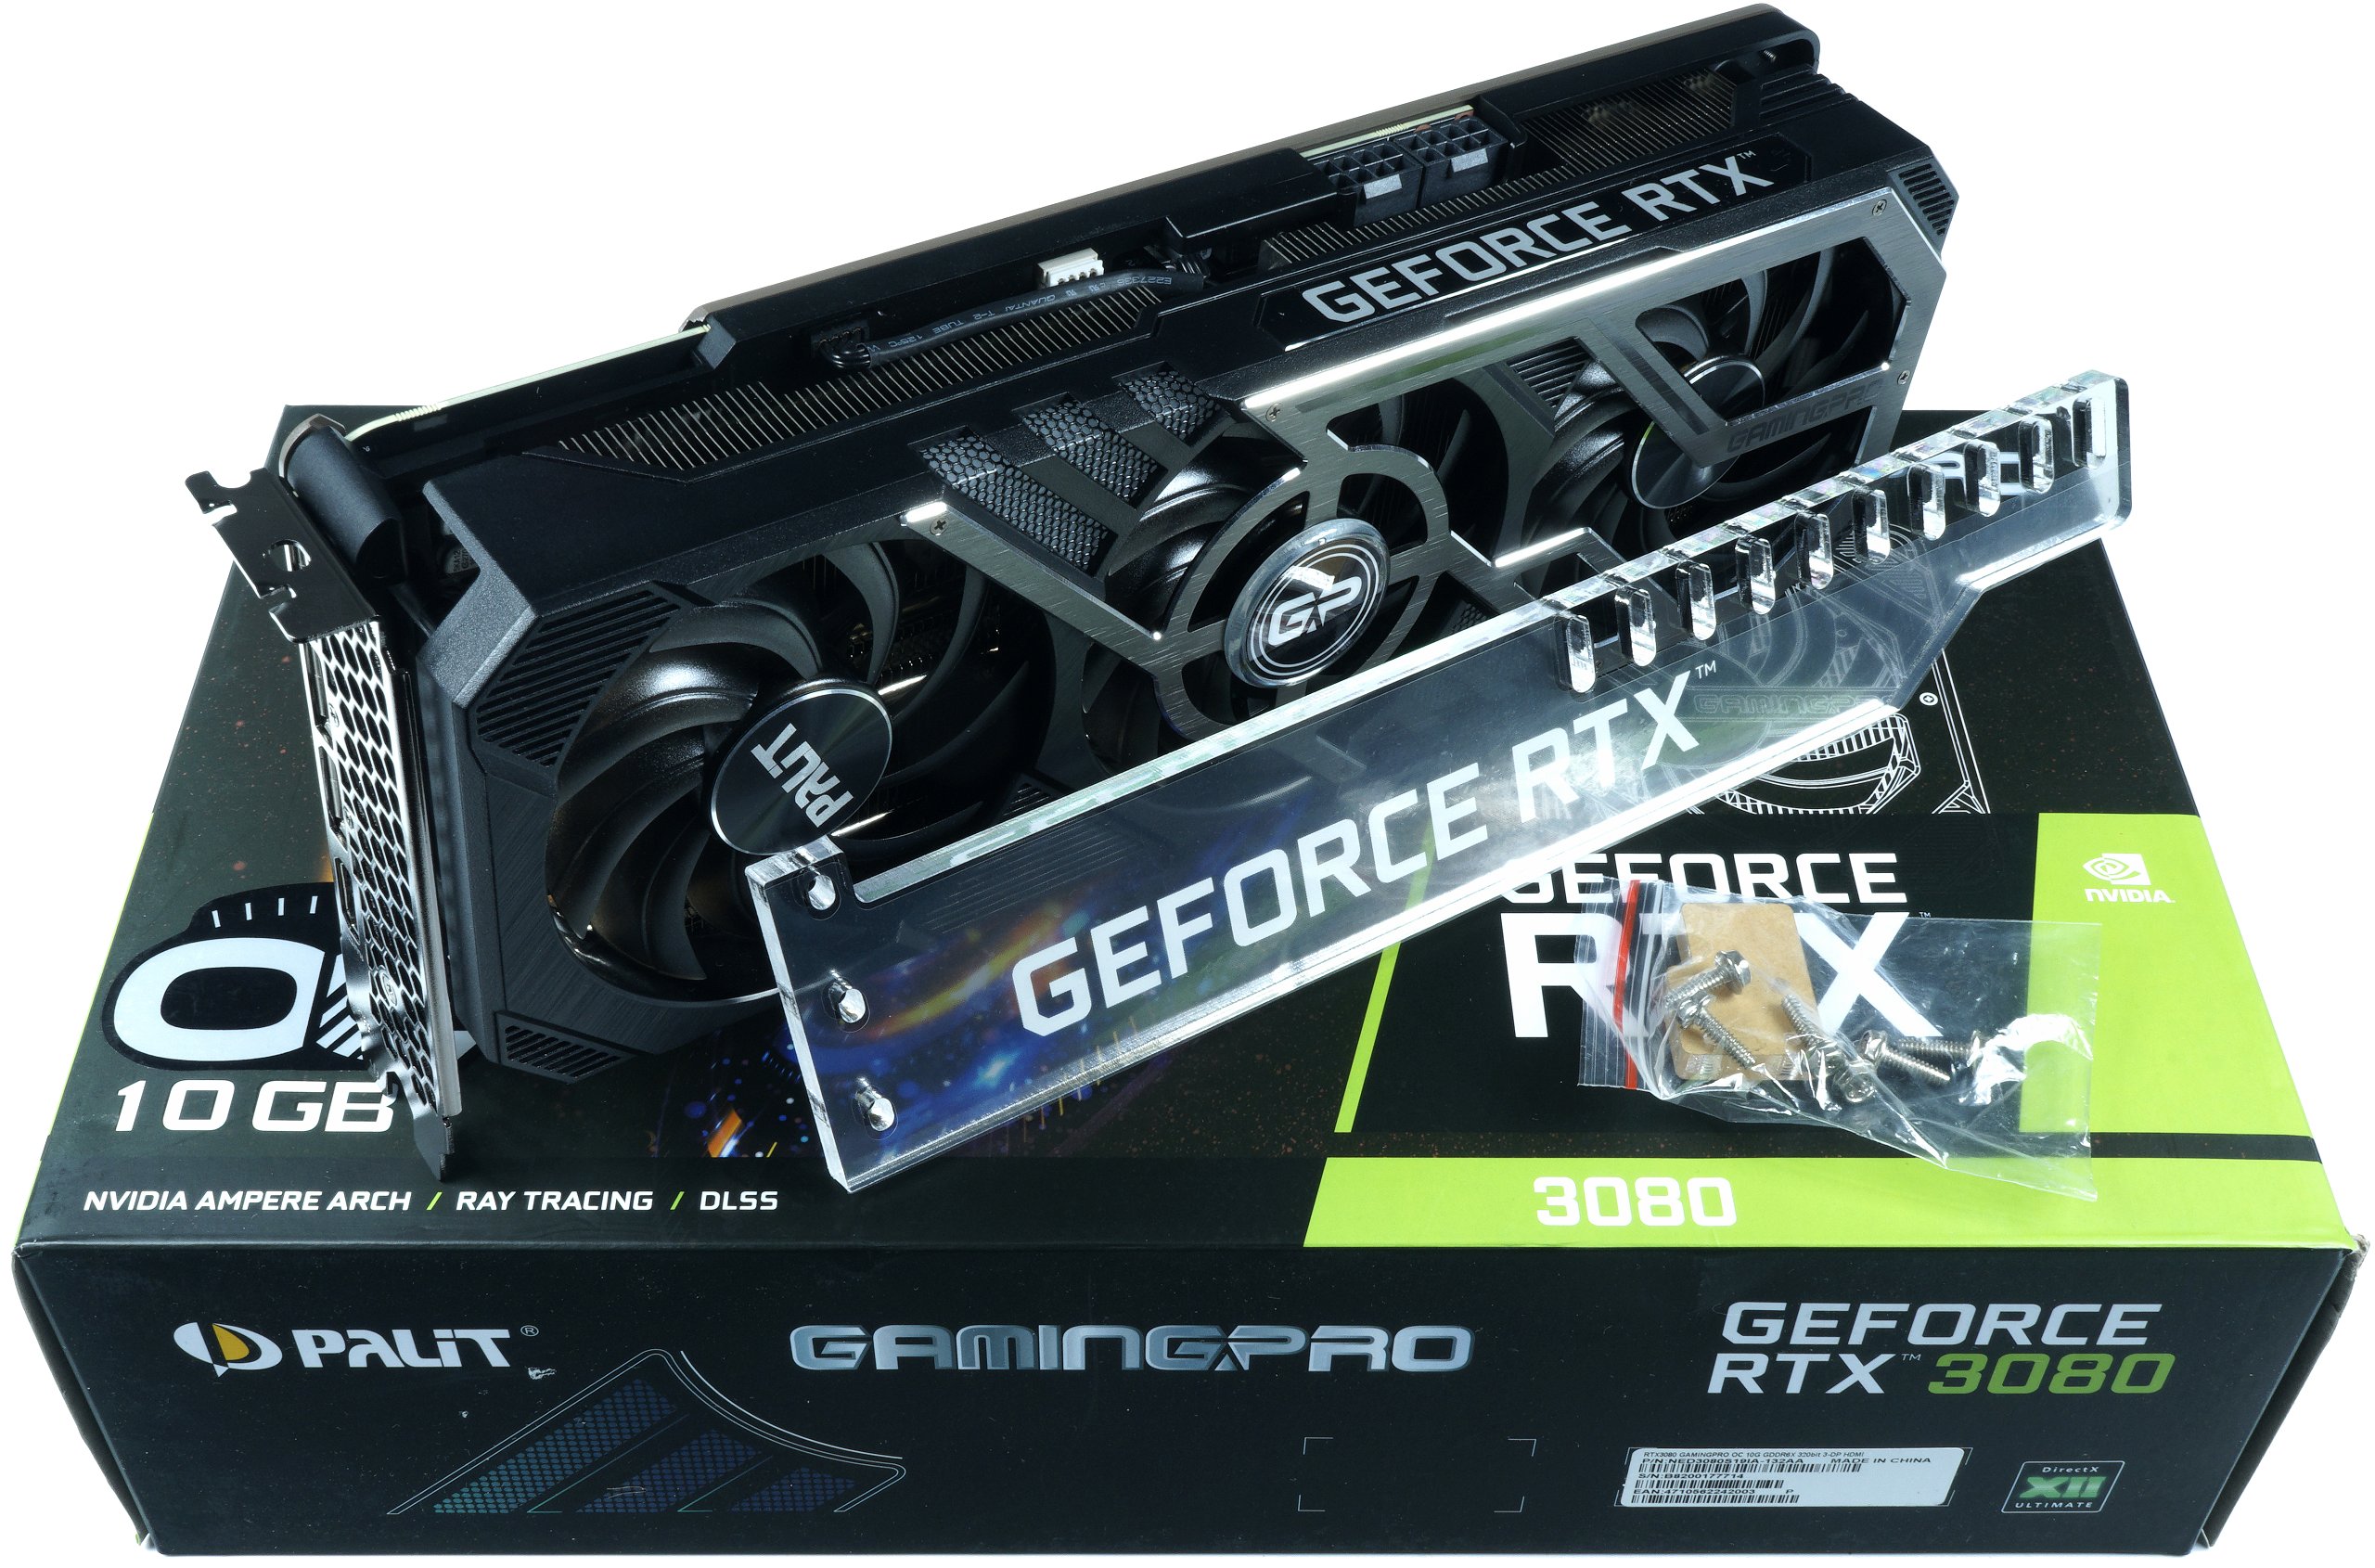 Palit GeForce RTX 3080 Gaming Pro Review - Reasonable Entry 